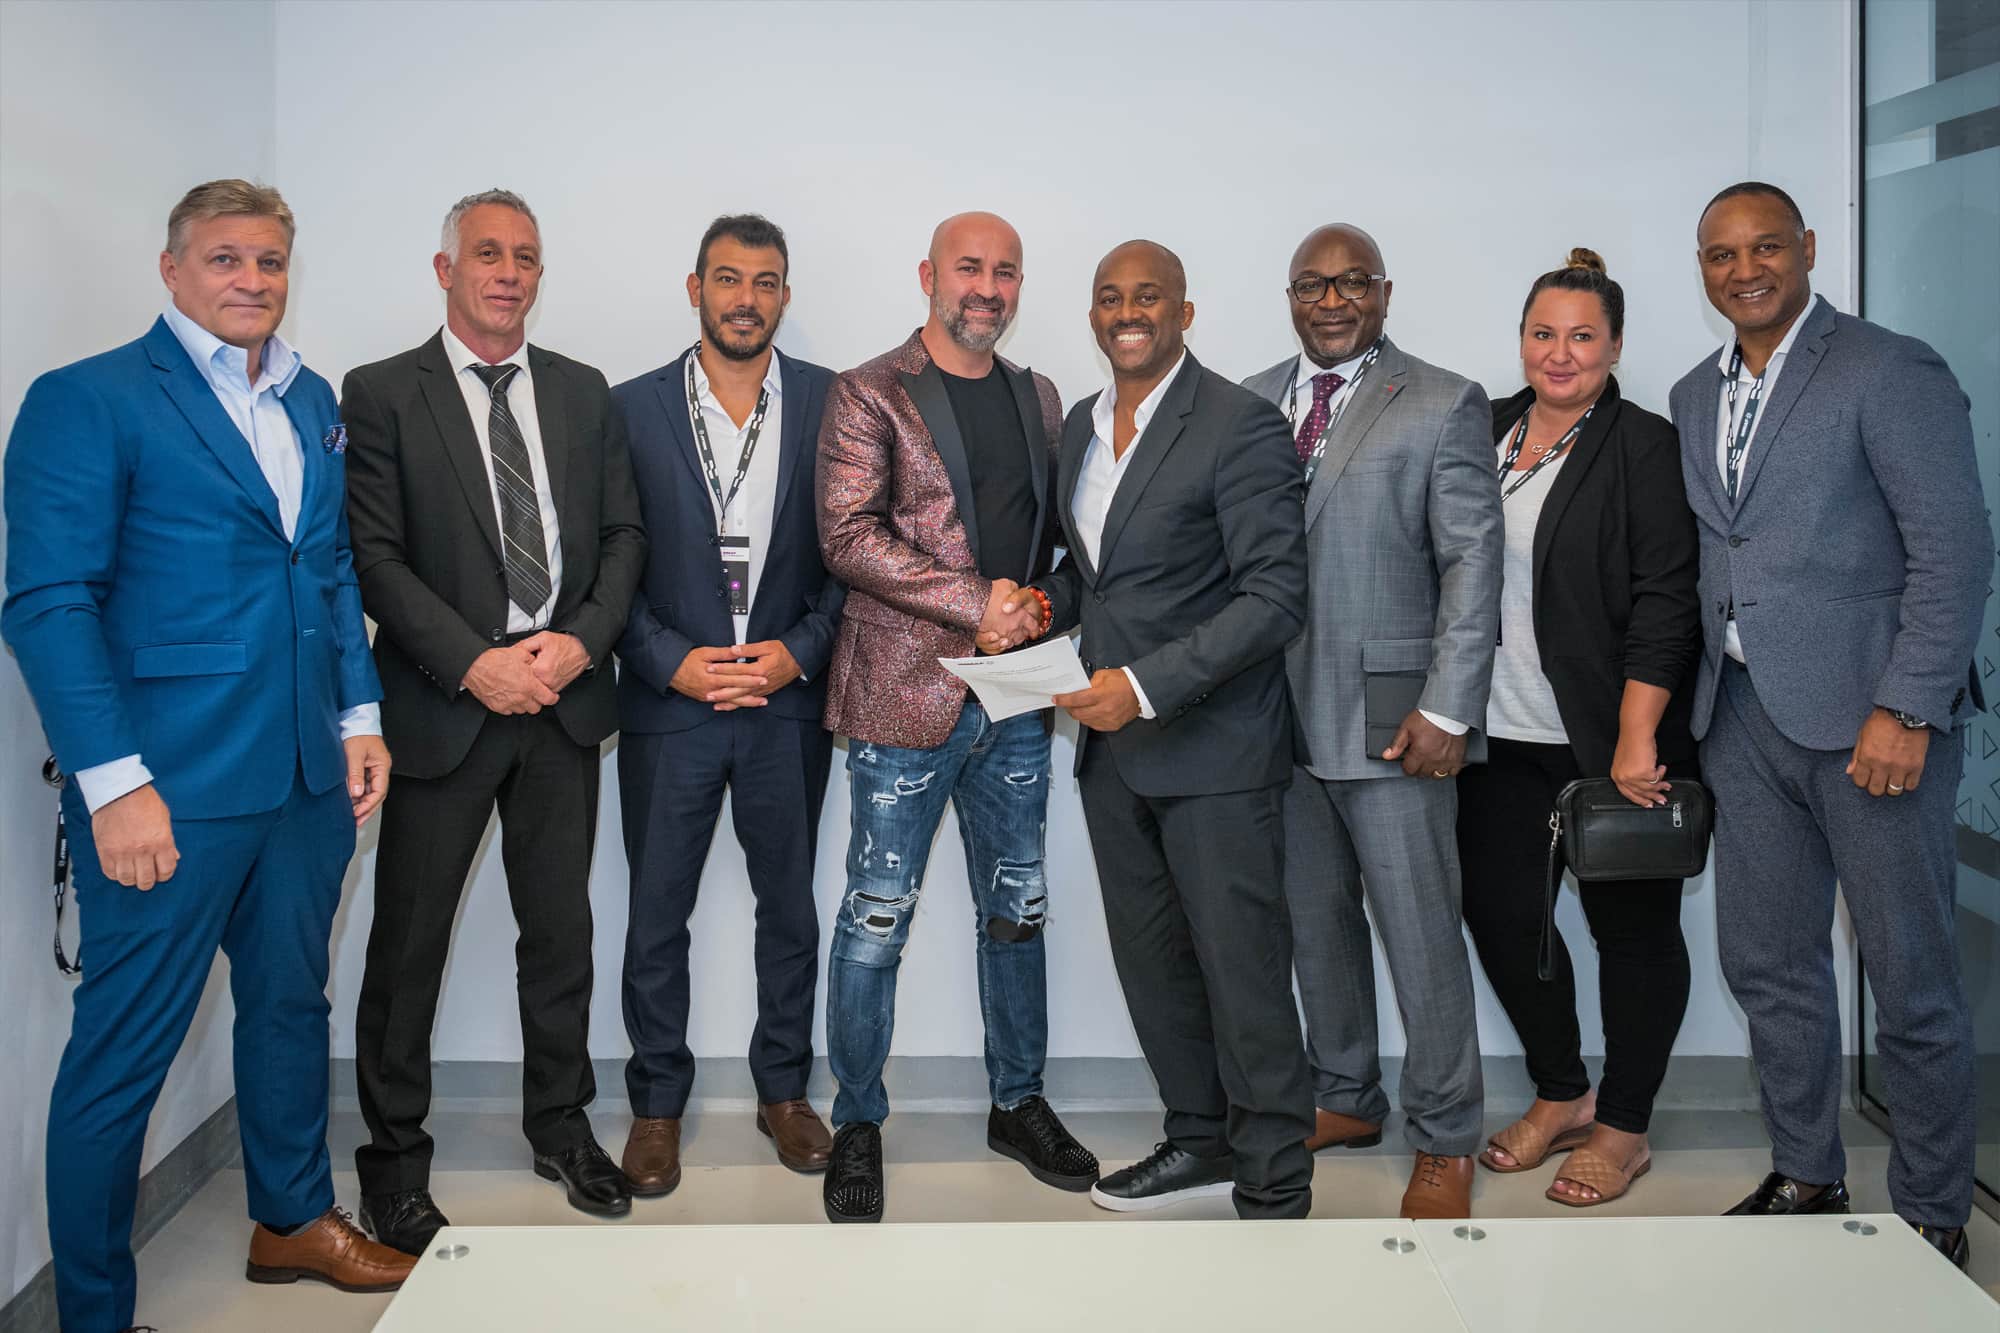 ISMM buys hosting rights to IMMAF World Championships 2023 – 2027